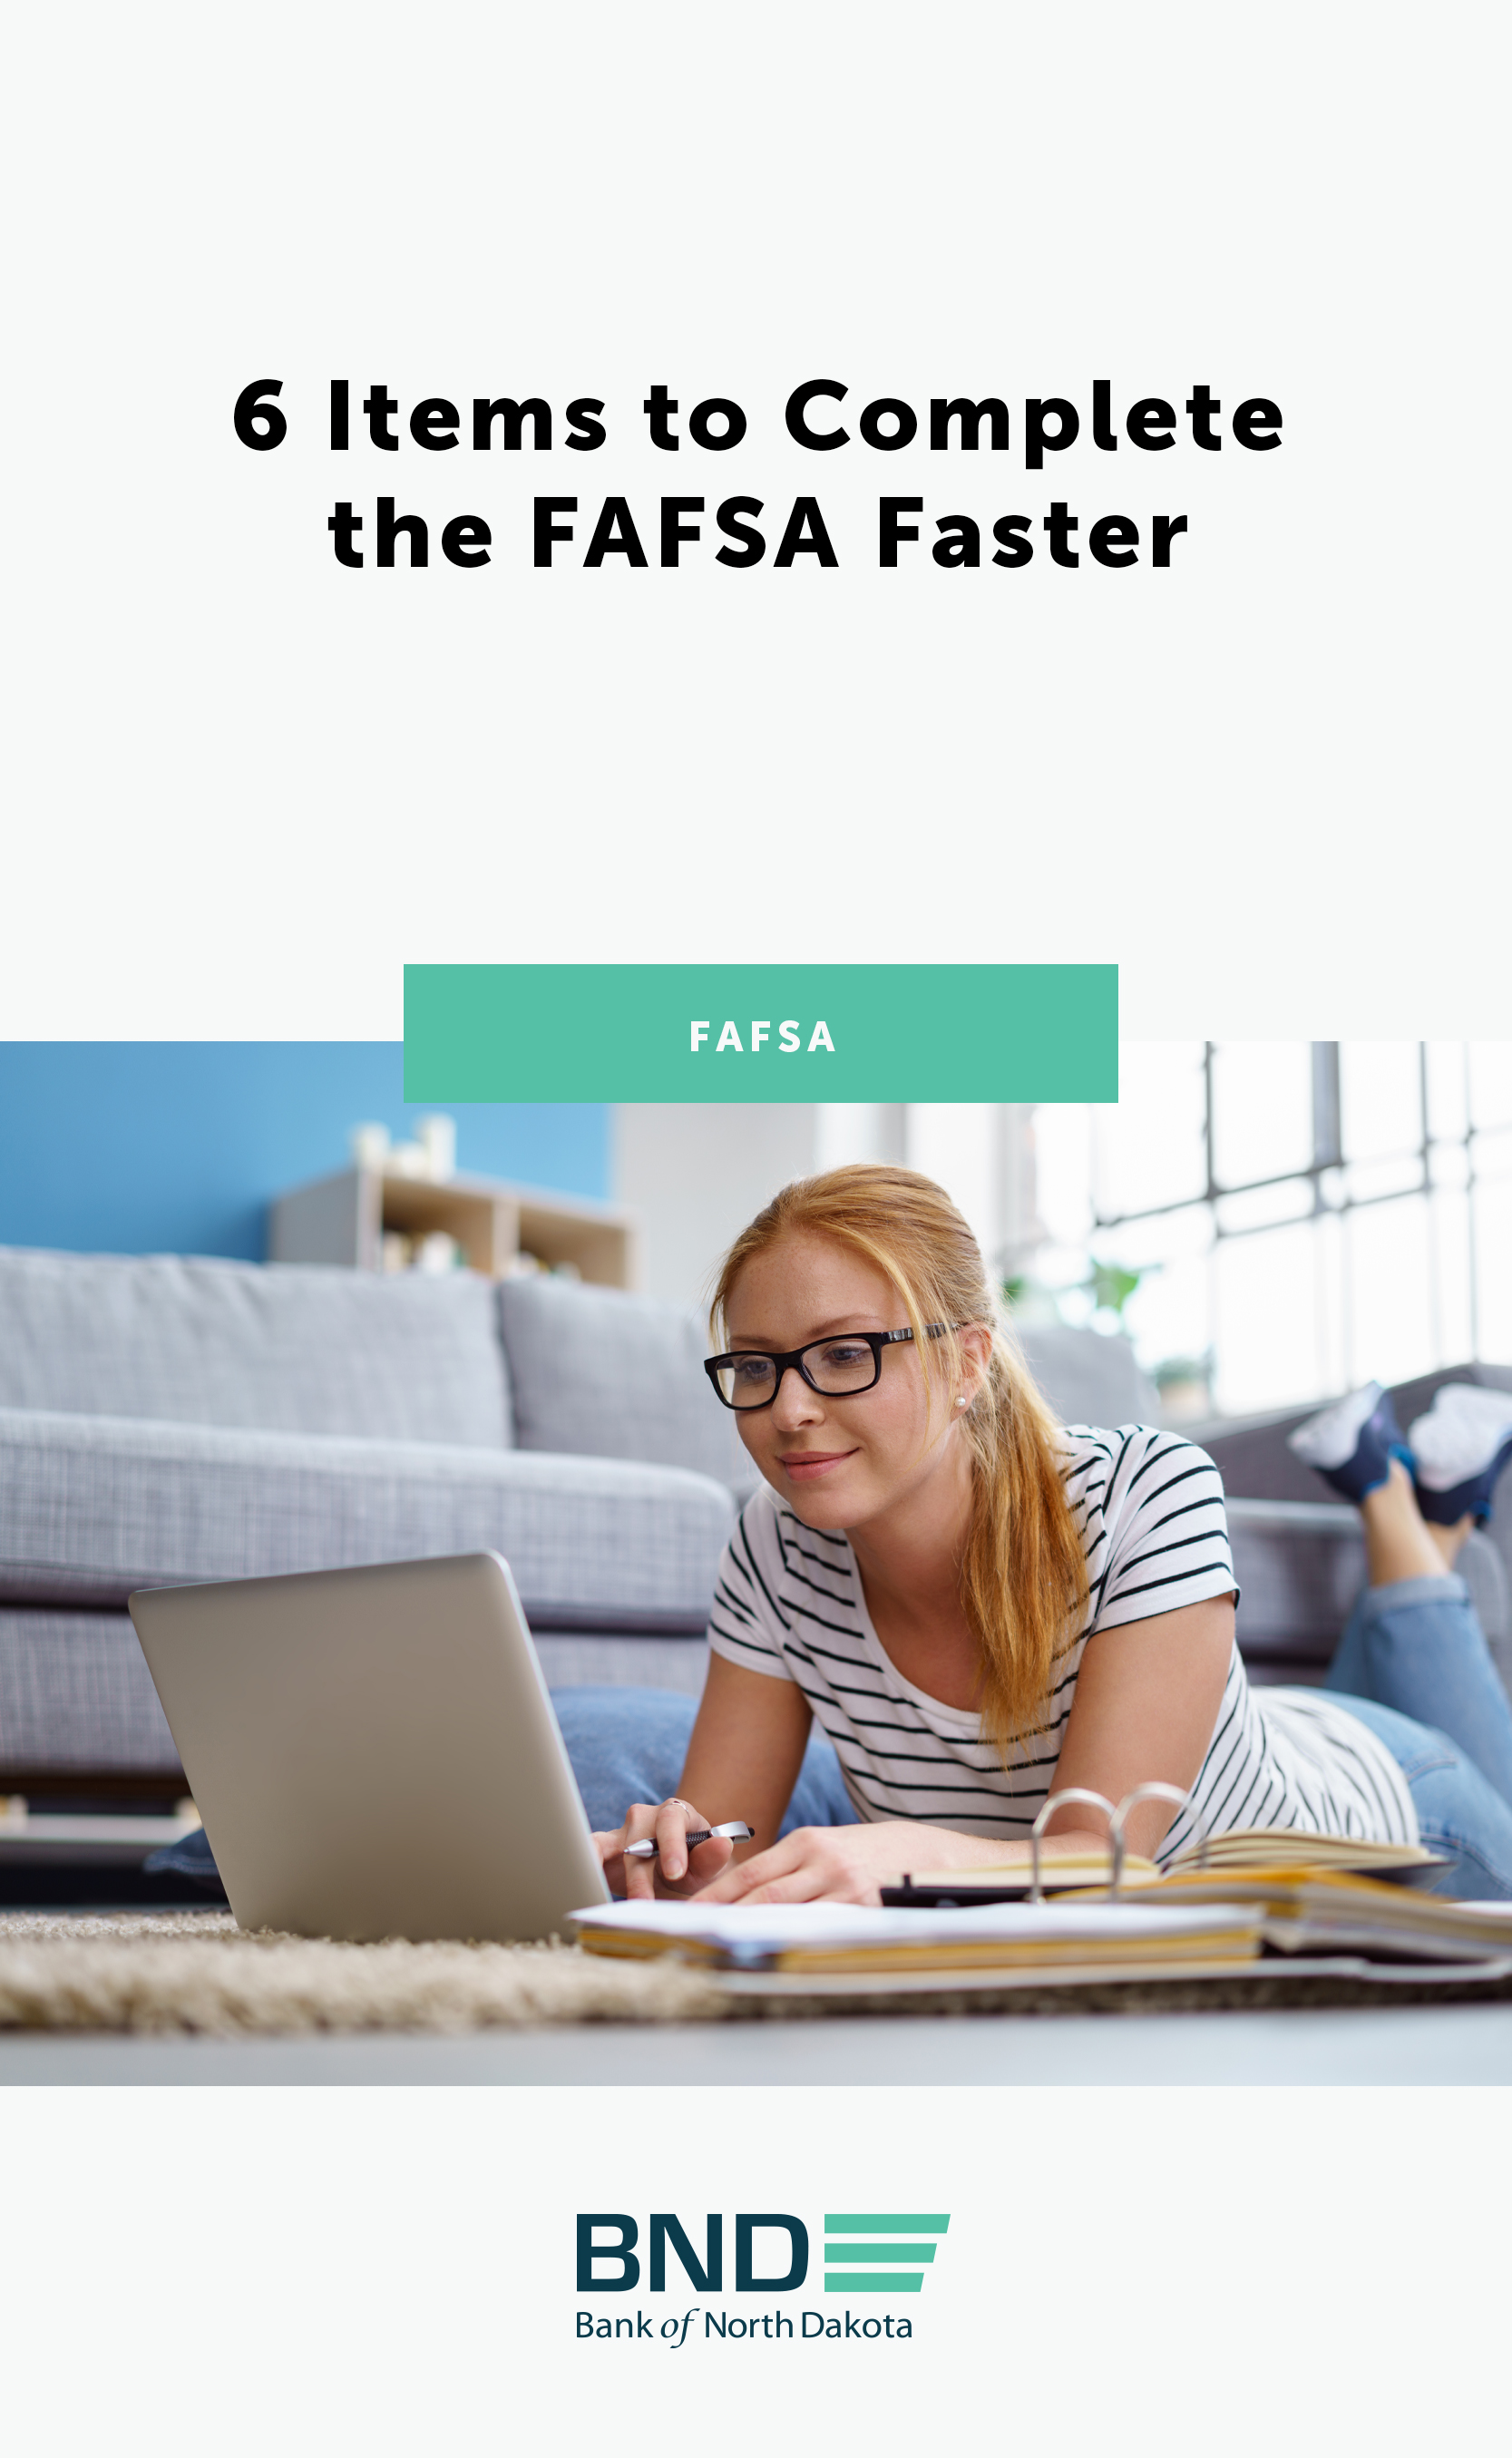 6-Items-to-Complete-the-FAFSA